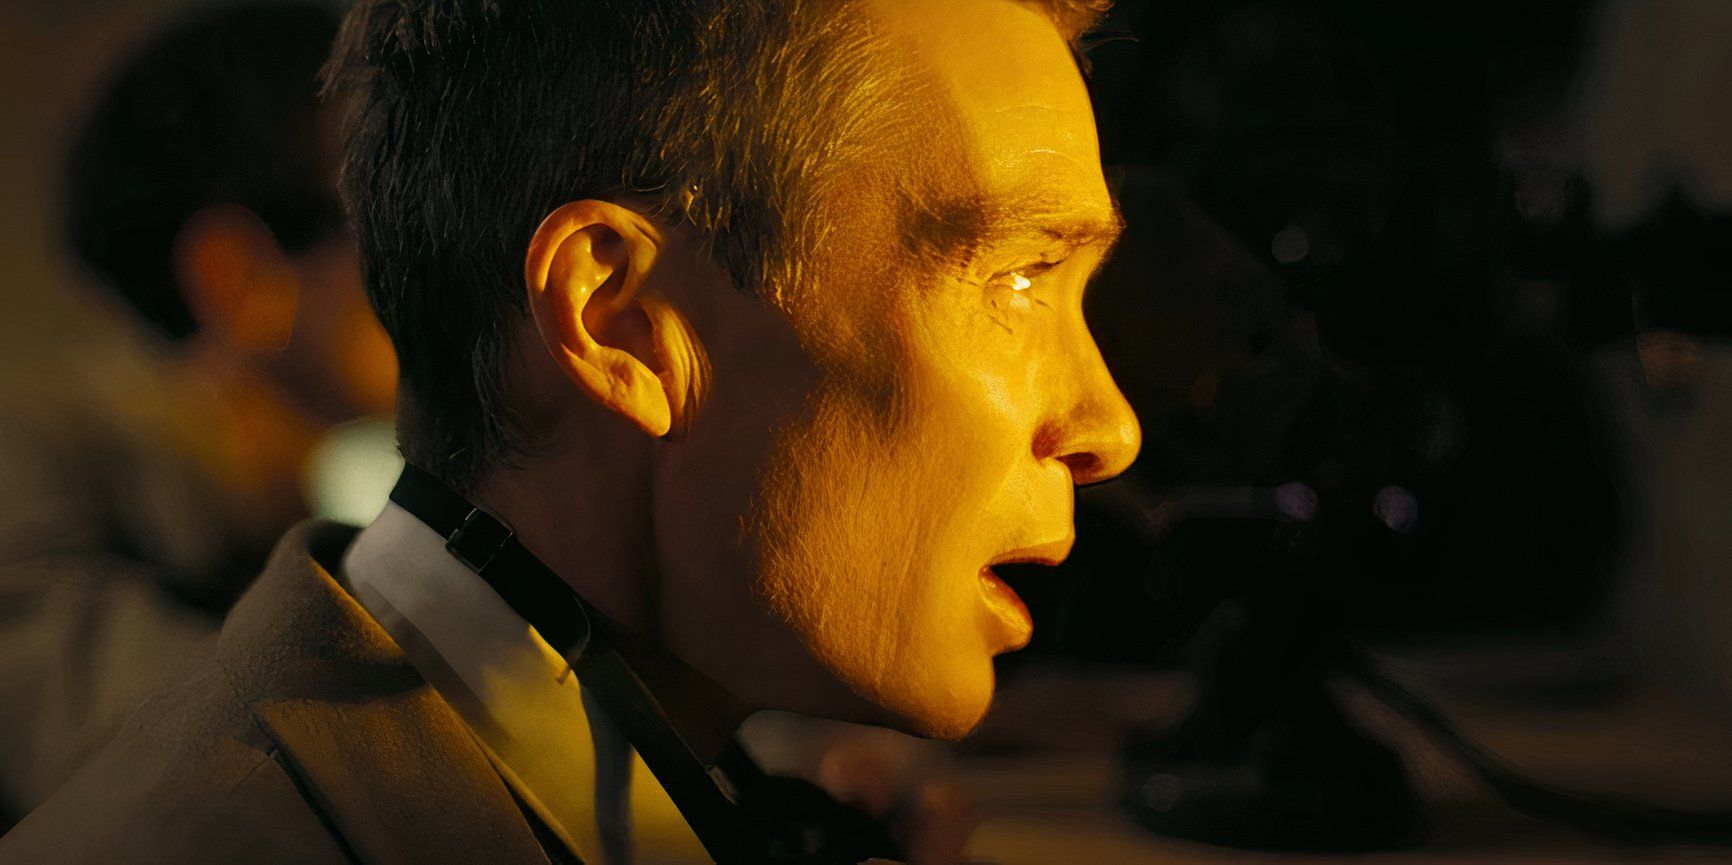 J. Robert Oppenheimer (Cillian Murphy) looks stunned as he watches the nuclear detonation at Los Alamos in Oppenheimer